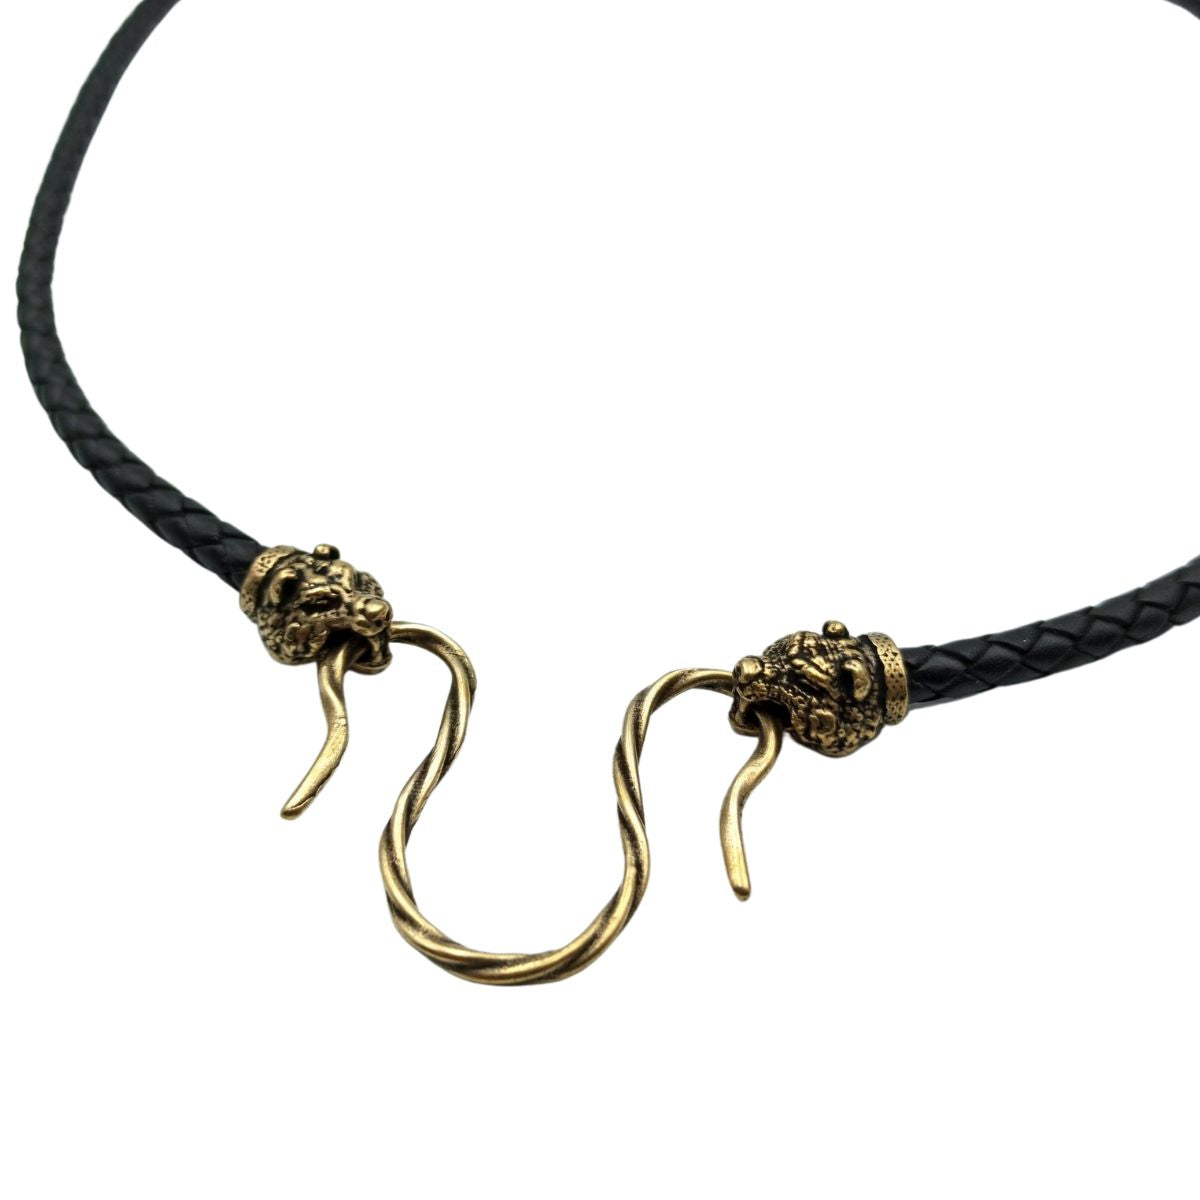 Braided cord for pendant  leather necklace – WikkedKnot jewelry